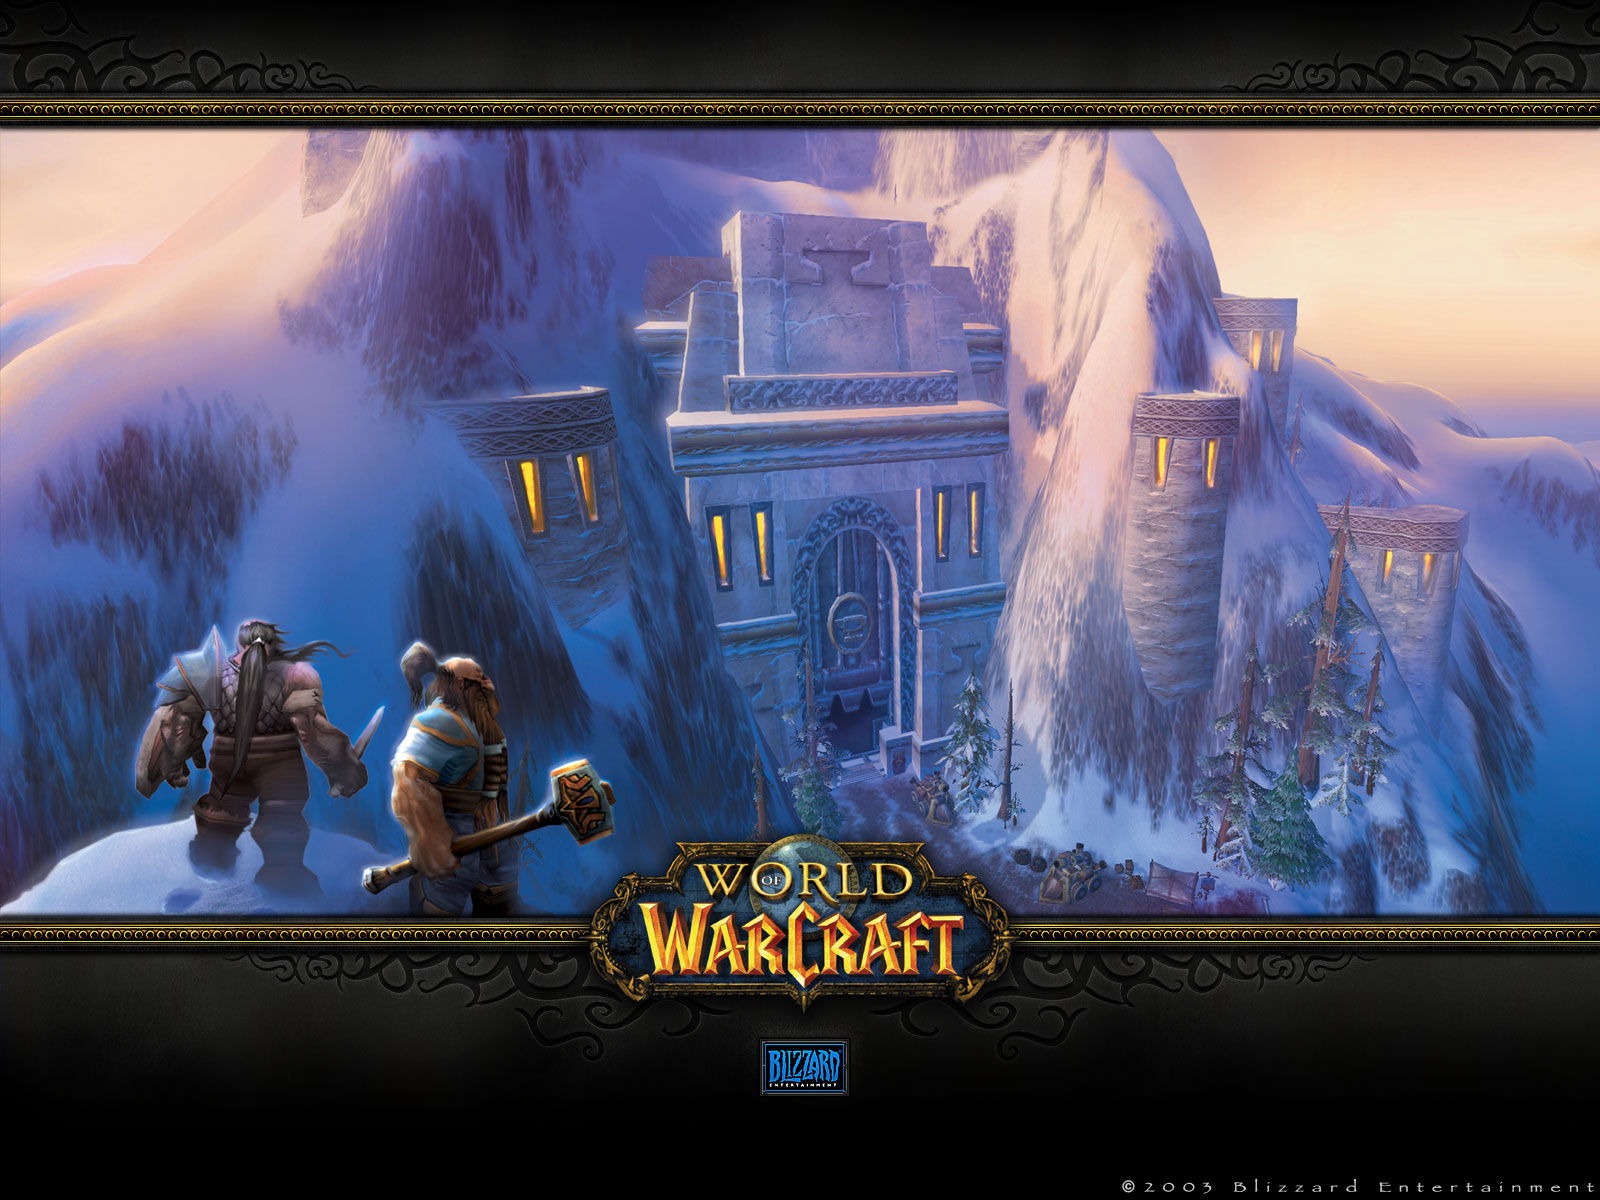 Ironforge: A scenic desktop wallpaper featuring a vibrant city with towering buildings and a bridge over water.